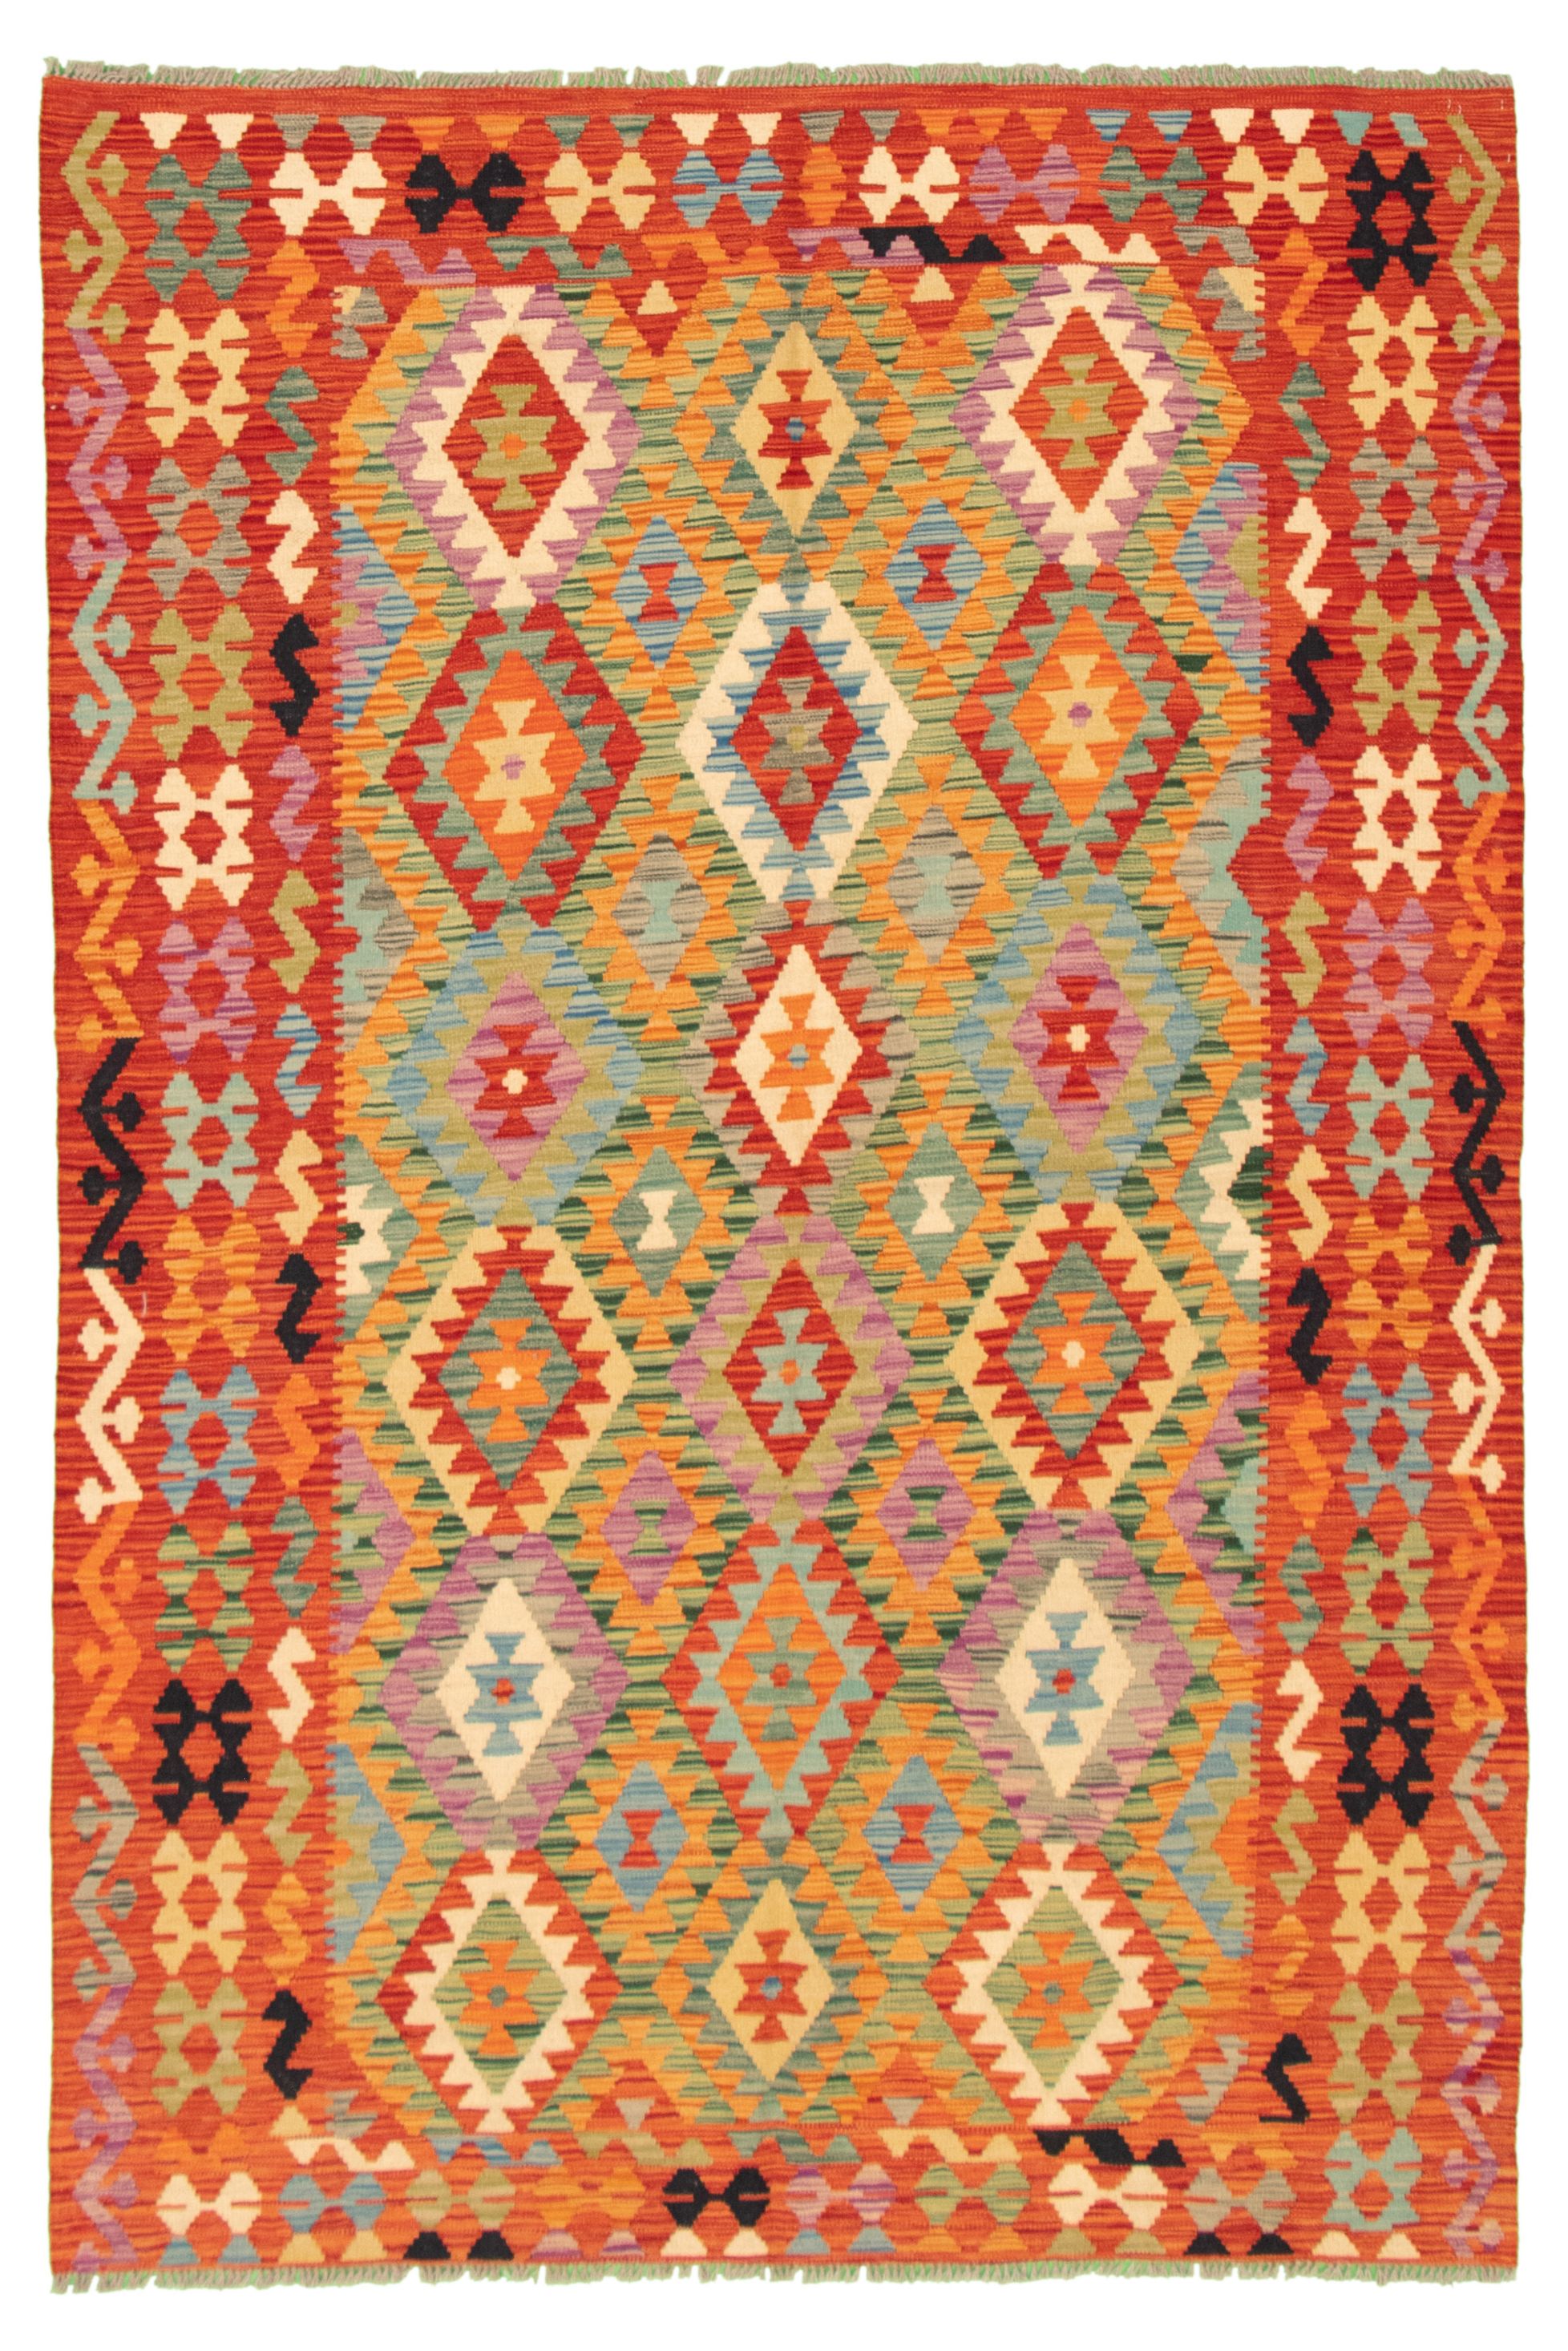 Hand woven Bold and Colorful  Red Wool Kilim 5'8" x 8'5" Size: 5'8" x 8'5"  